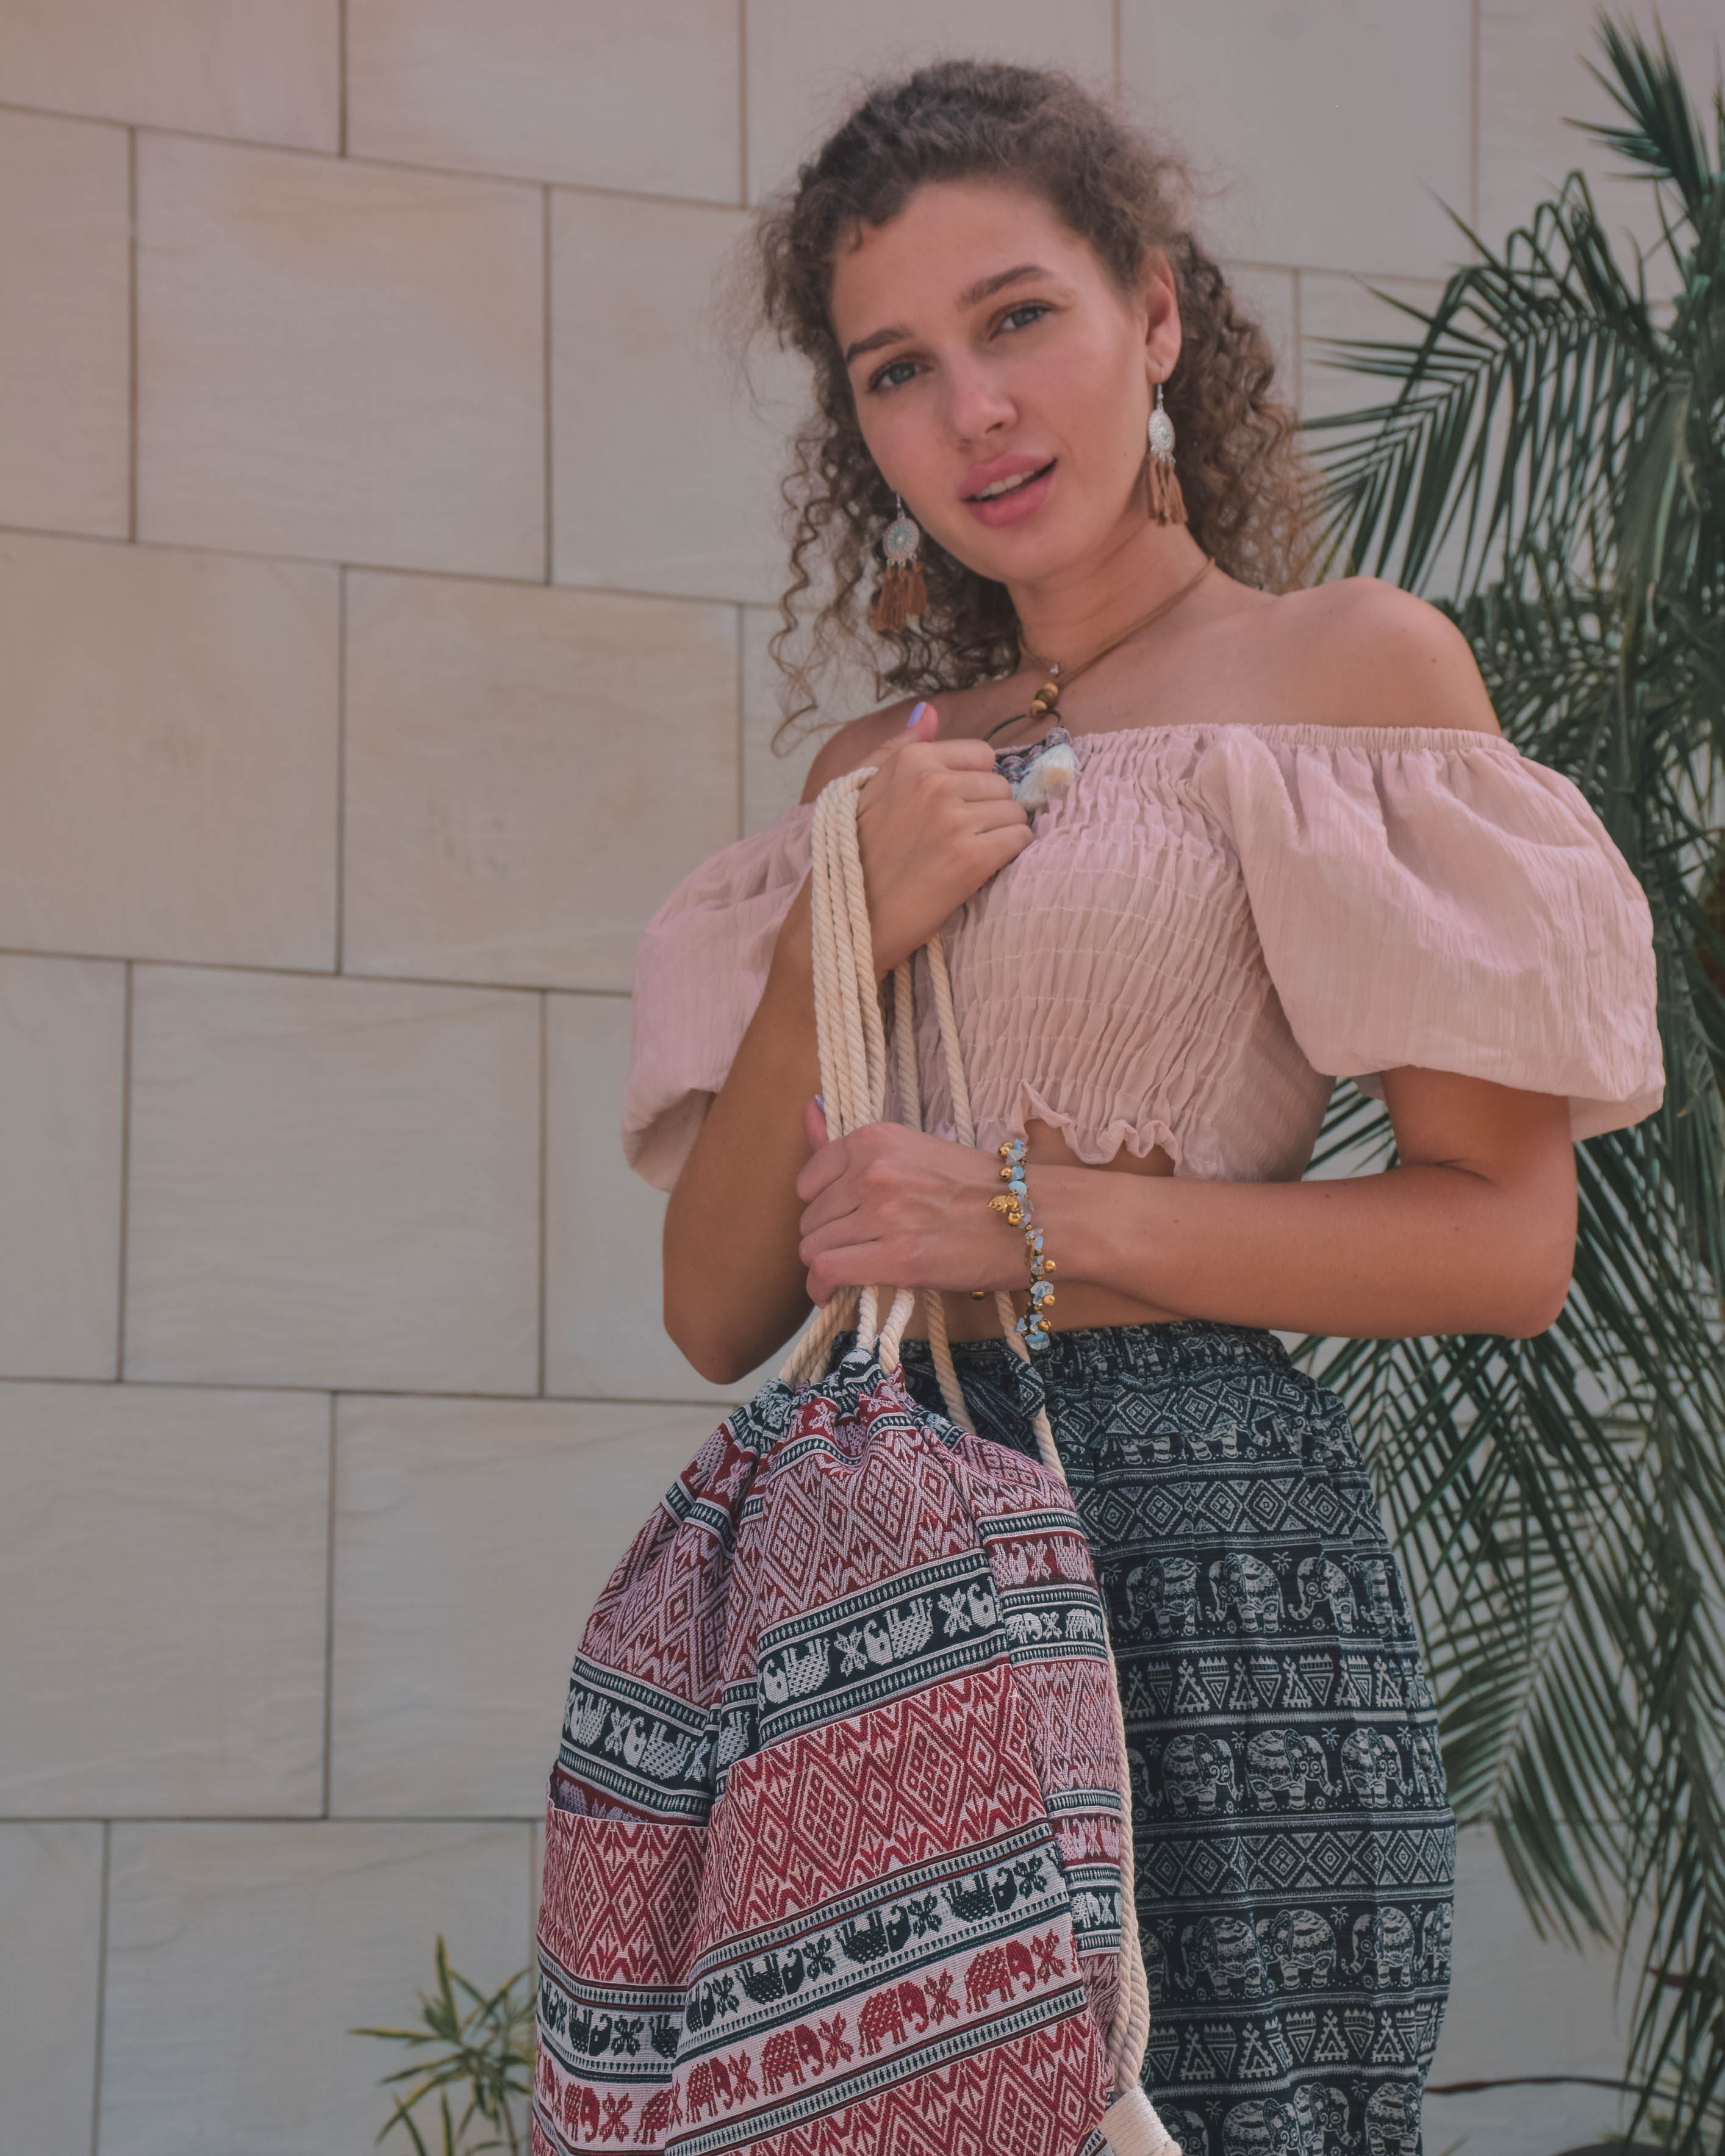 MALAWI DRAWSTRING BAG Elepanta Travel Bags - Buy Today Elephant Pants Jewelry And Bohemian Clothes Handmade In Thailand Help To Save The Elephants FairTrade And Vegan